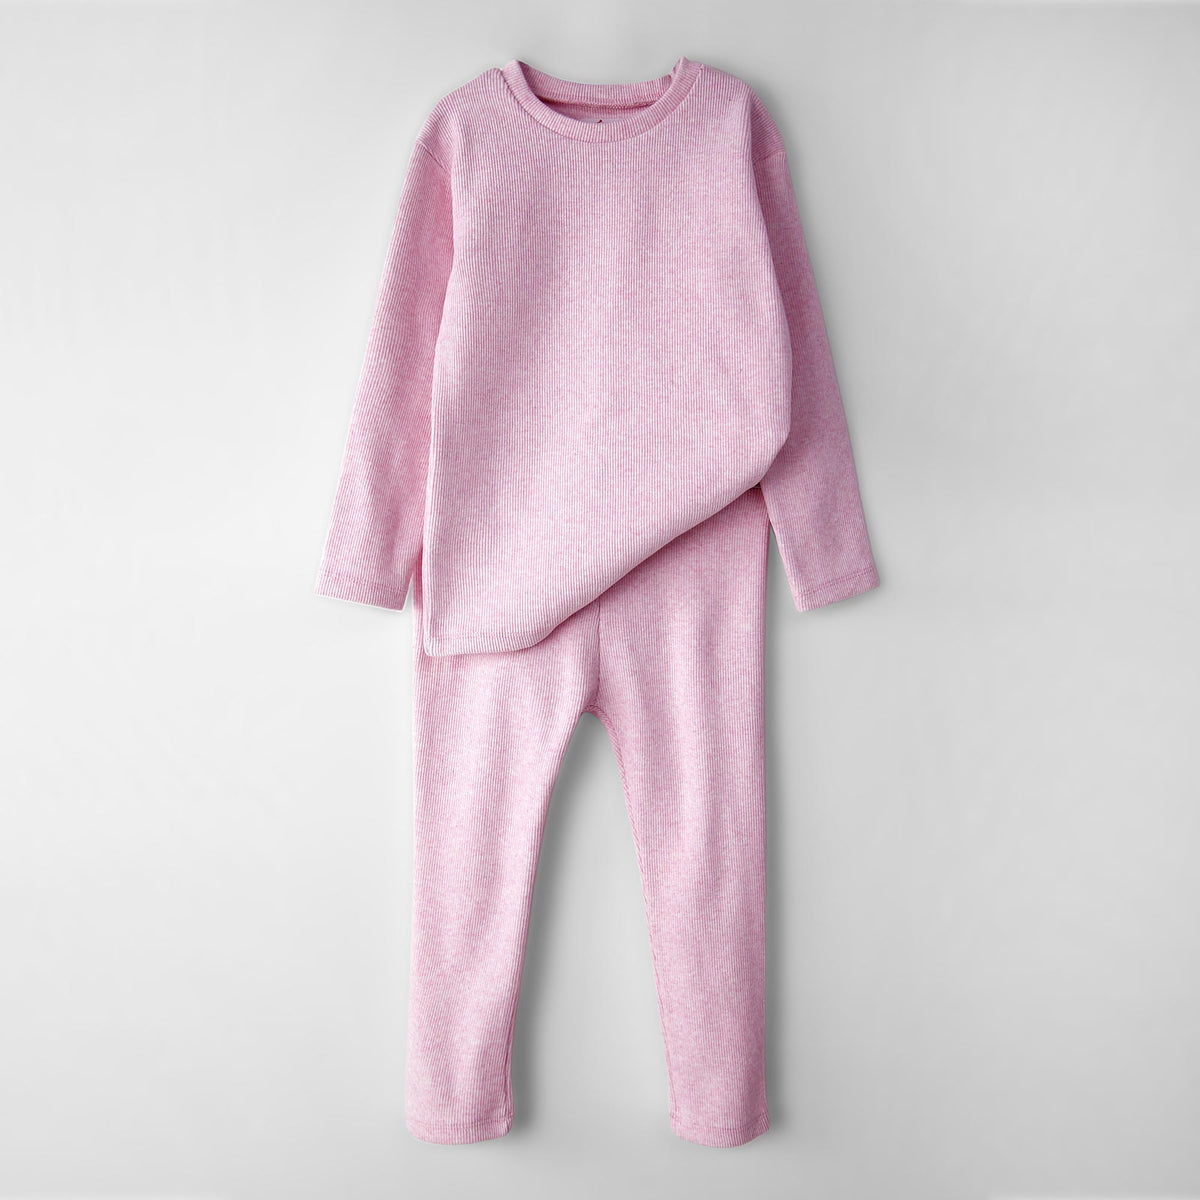 Premium Quality 2 Piece Pink Winter Inner Suit For Kids